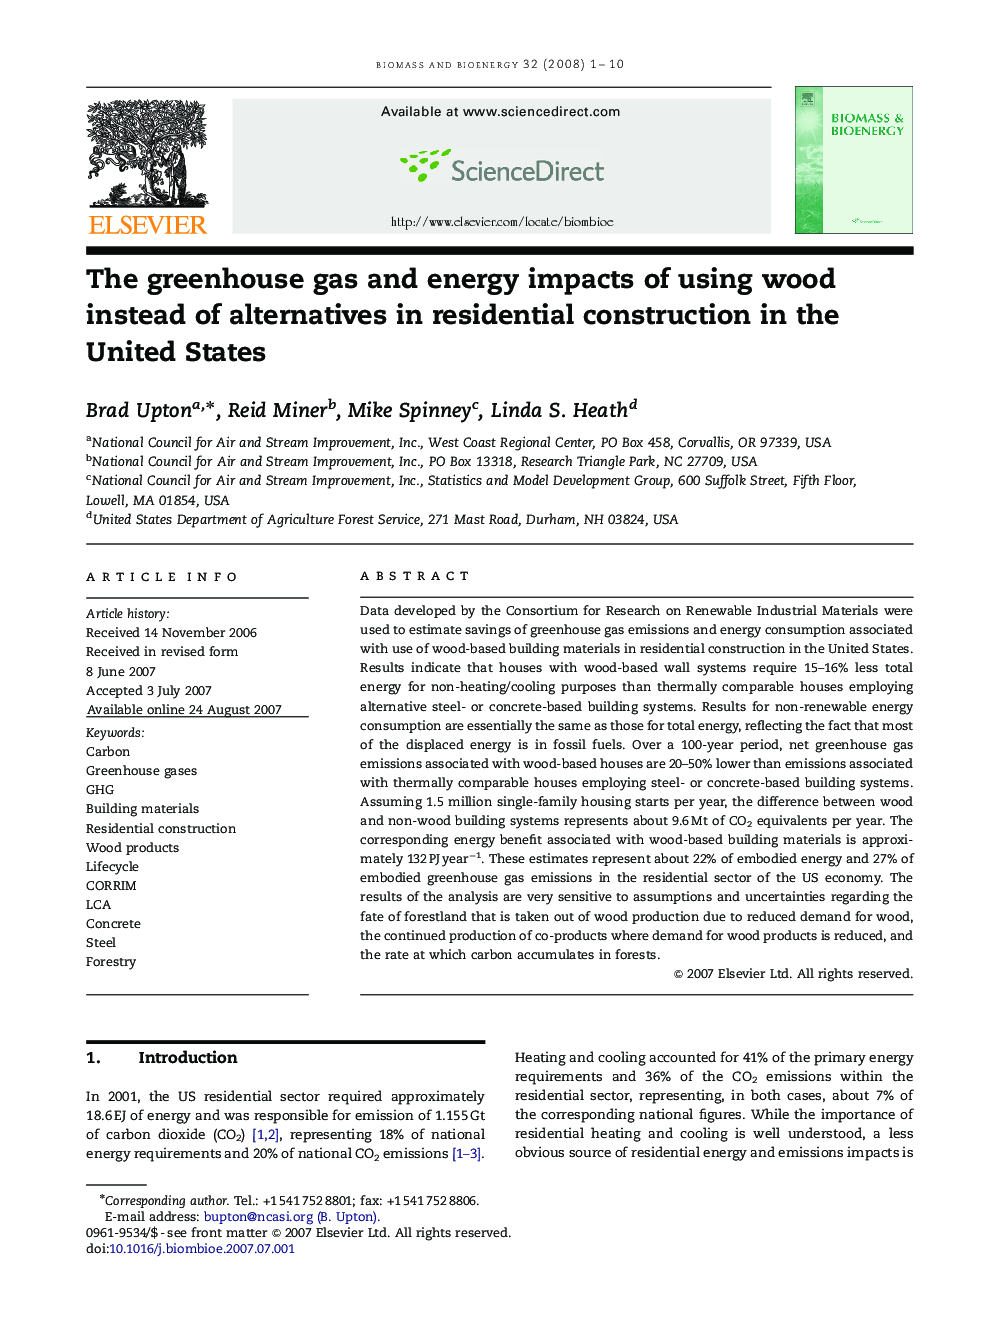 The greenhouse gas and energy impacts of using wood instead of alternatives in residential construction in the United States